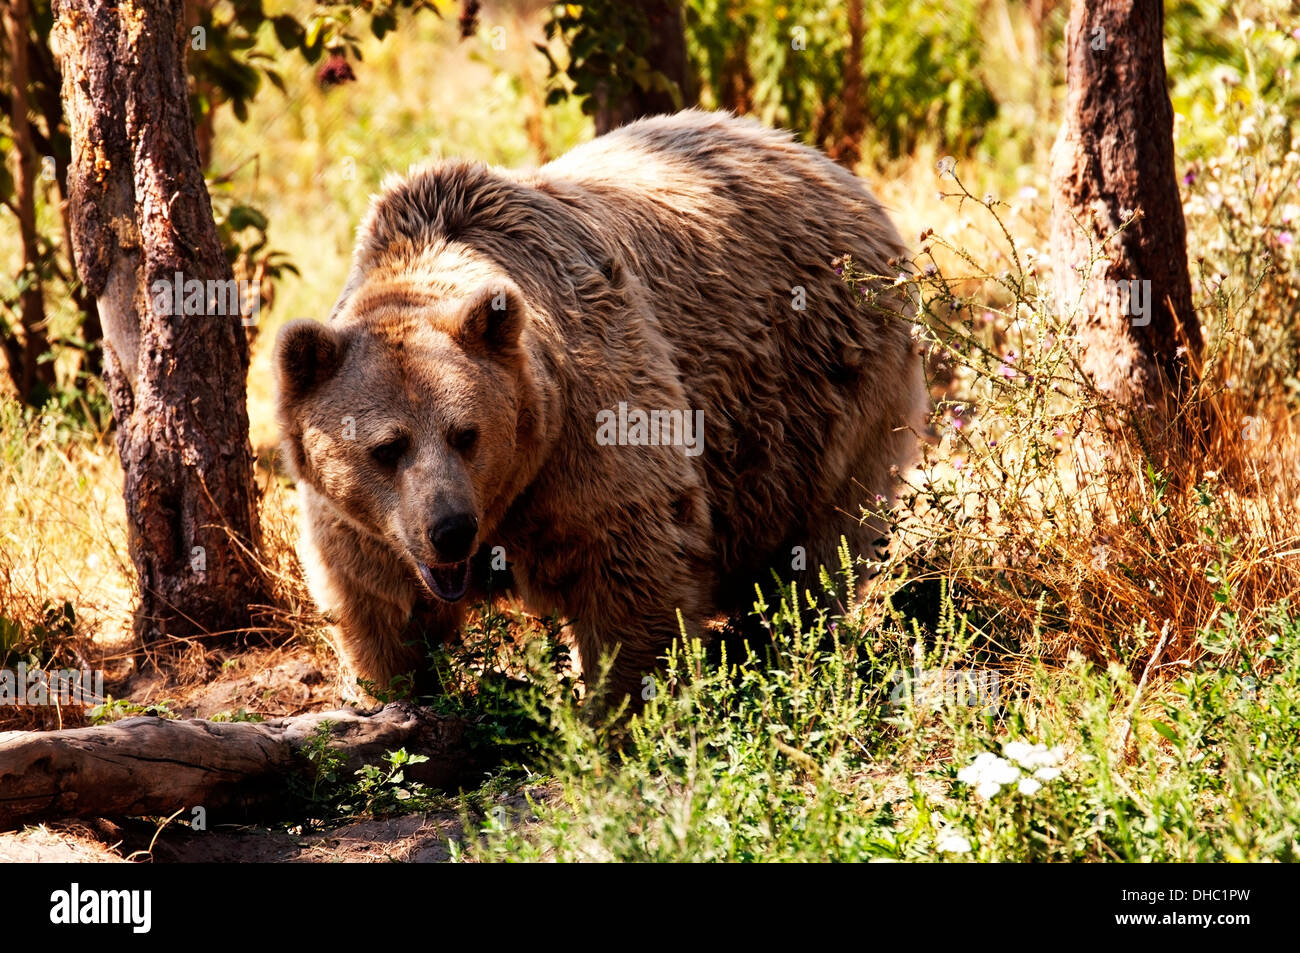 Grizzly bear in the forest Stock Photo